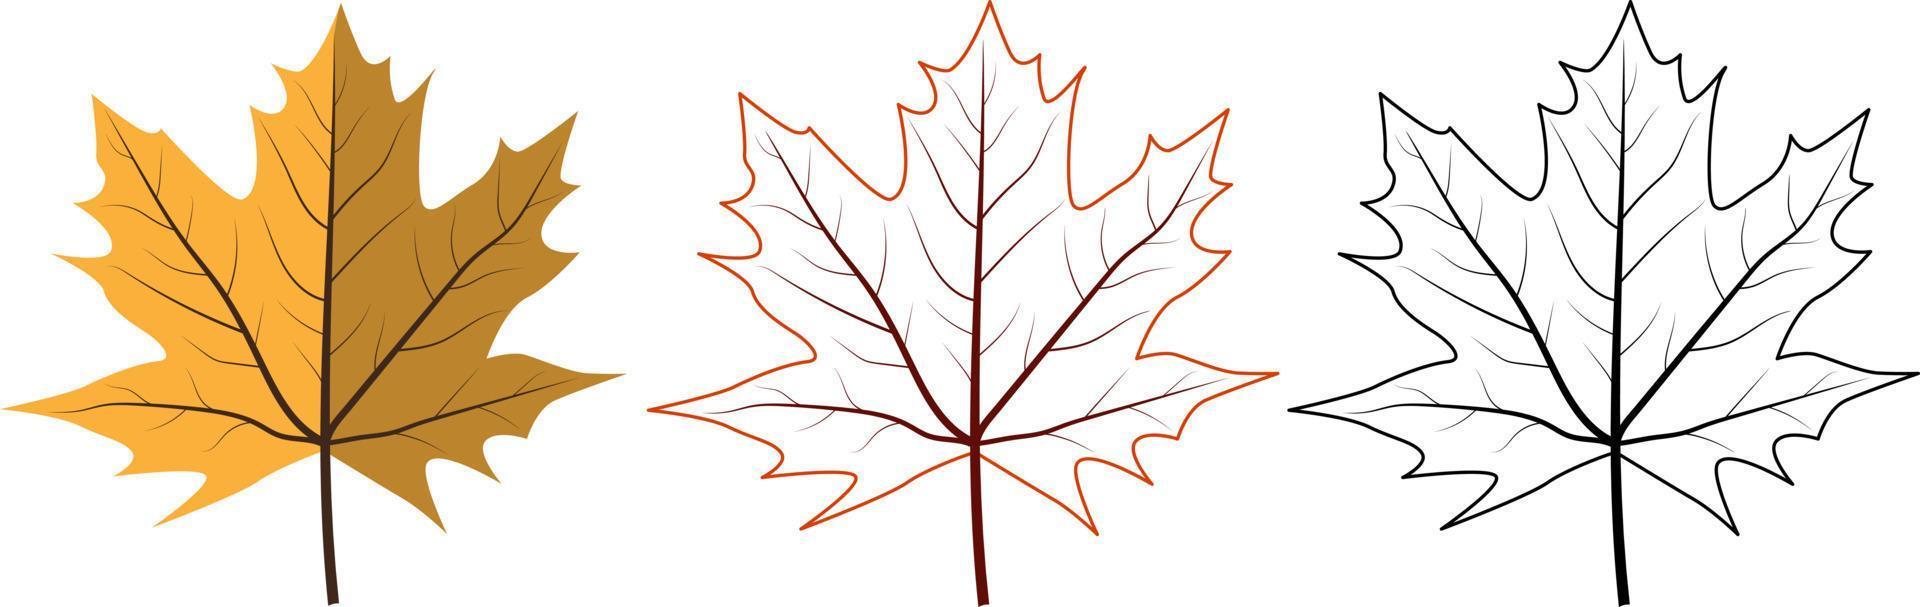 Set of different maple leaves. Includes colorful, contour and black outline leaves. vector